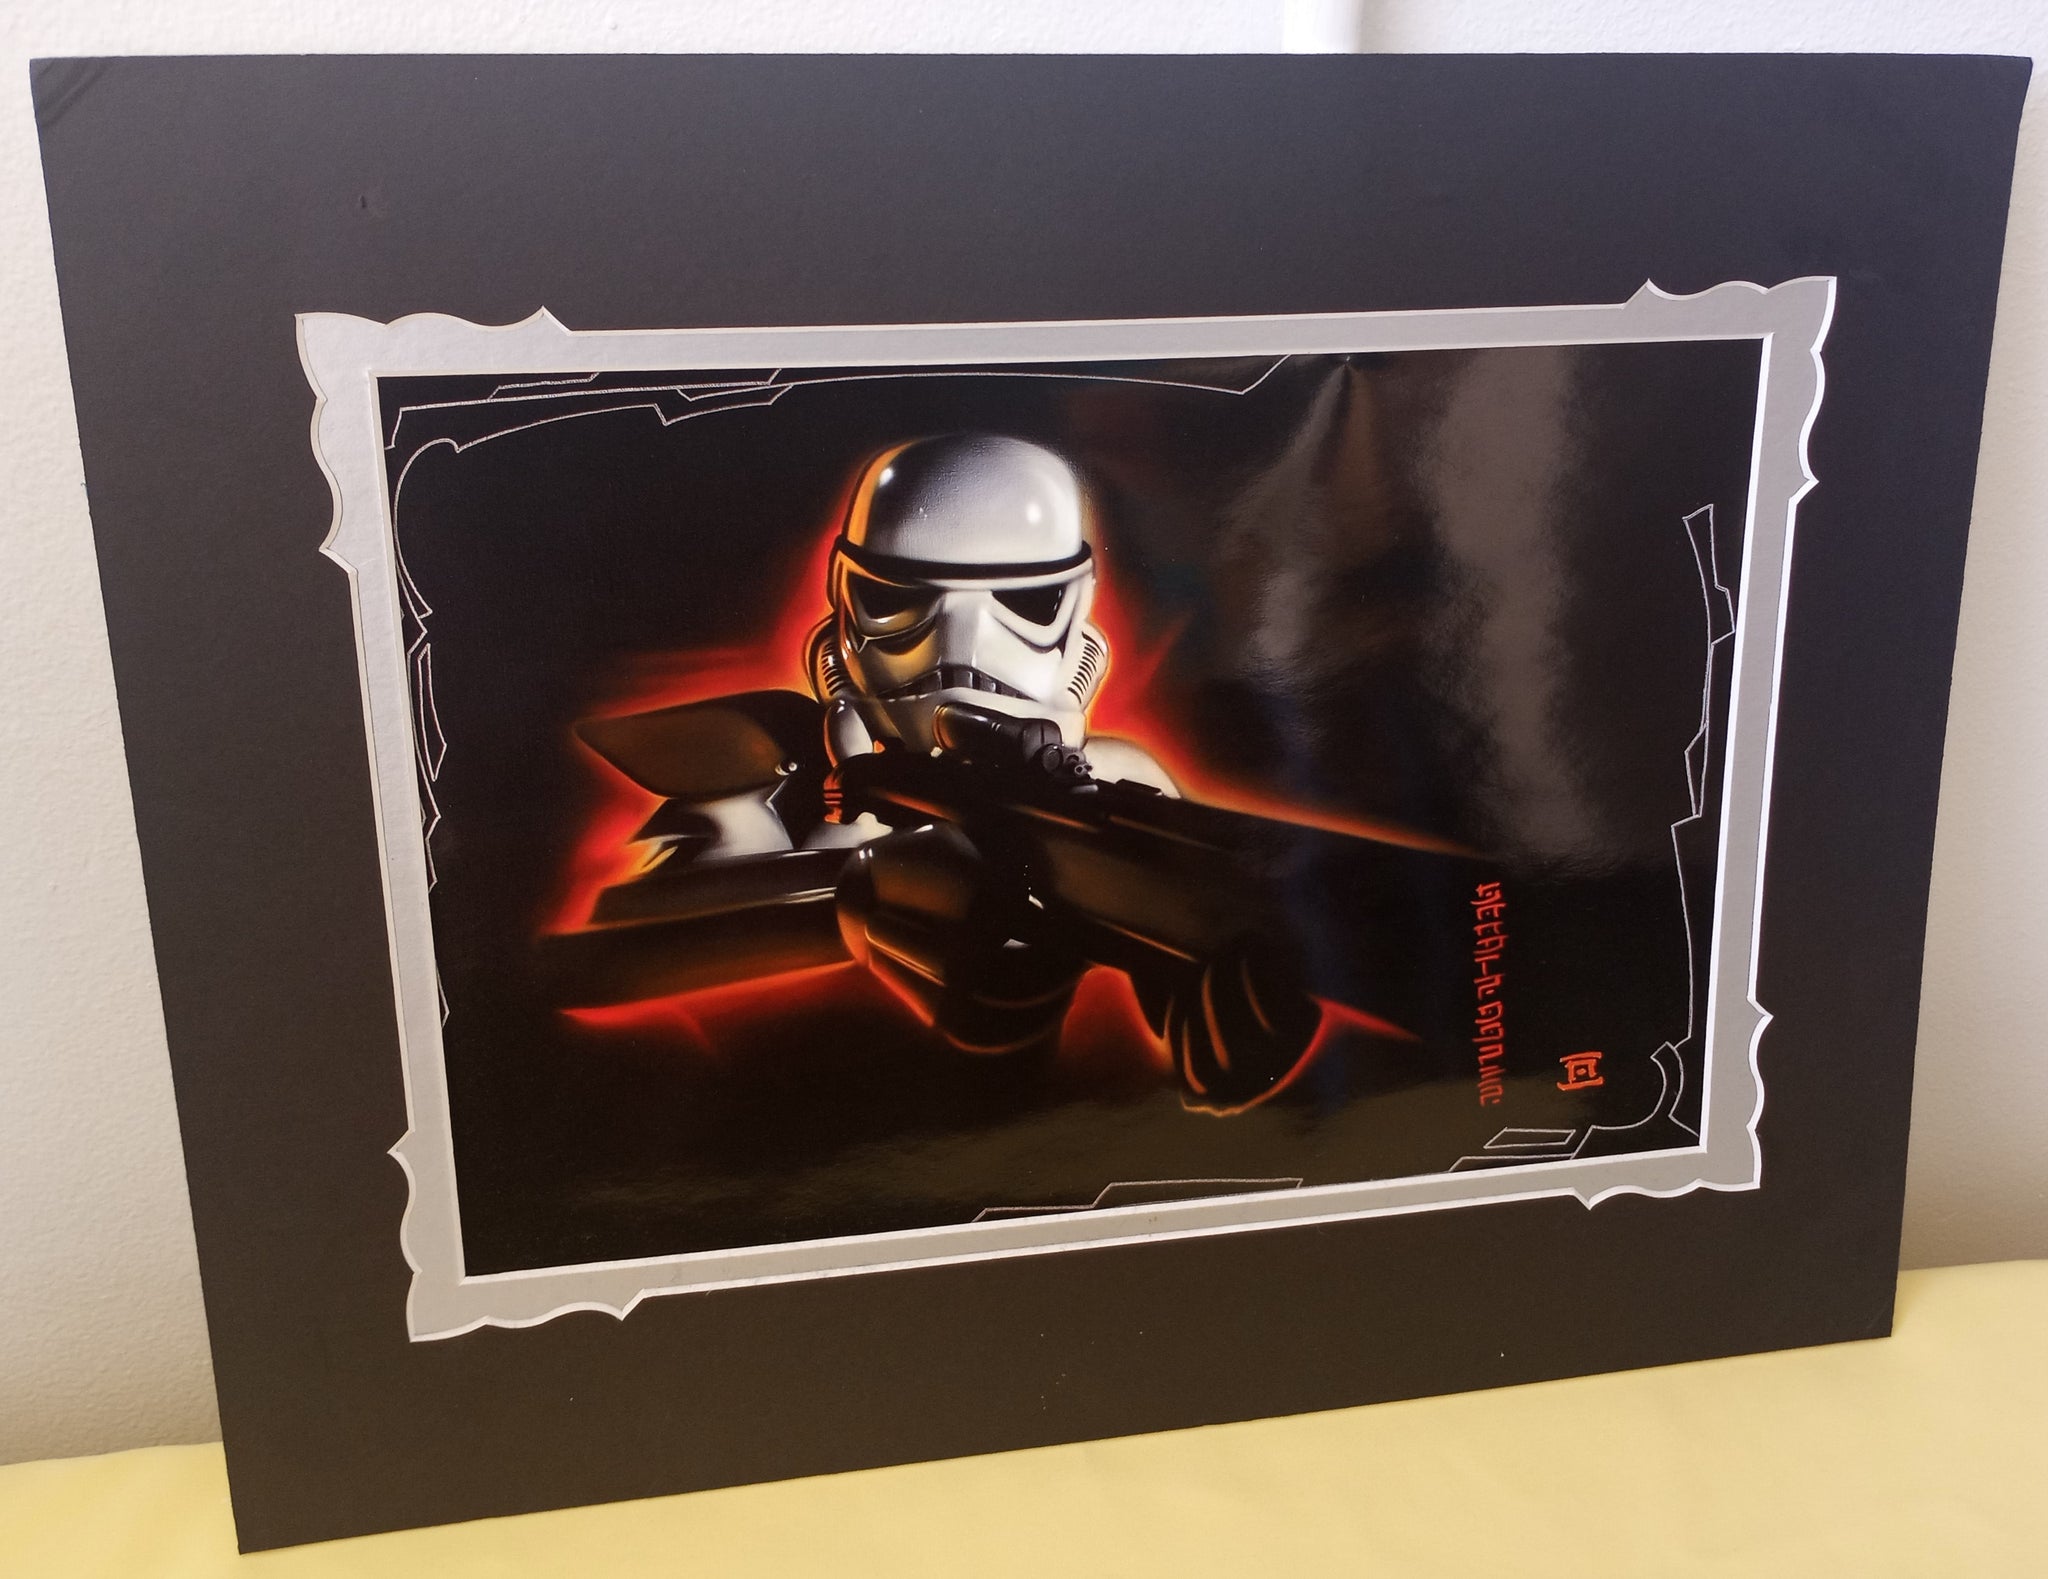 Star Wars Stormtrooper 14 x 18 Matted Print on Glossy Photo Paper